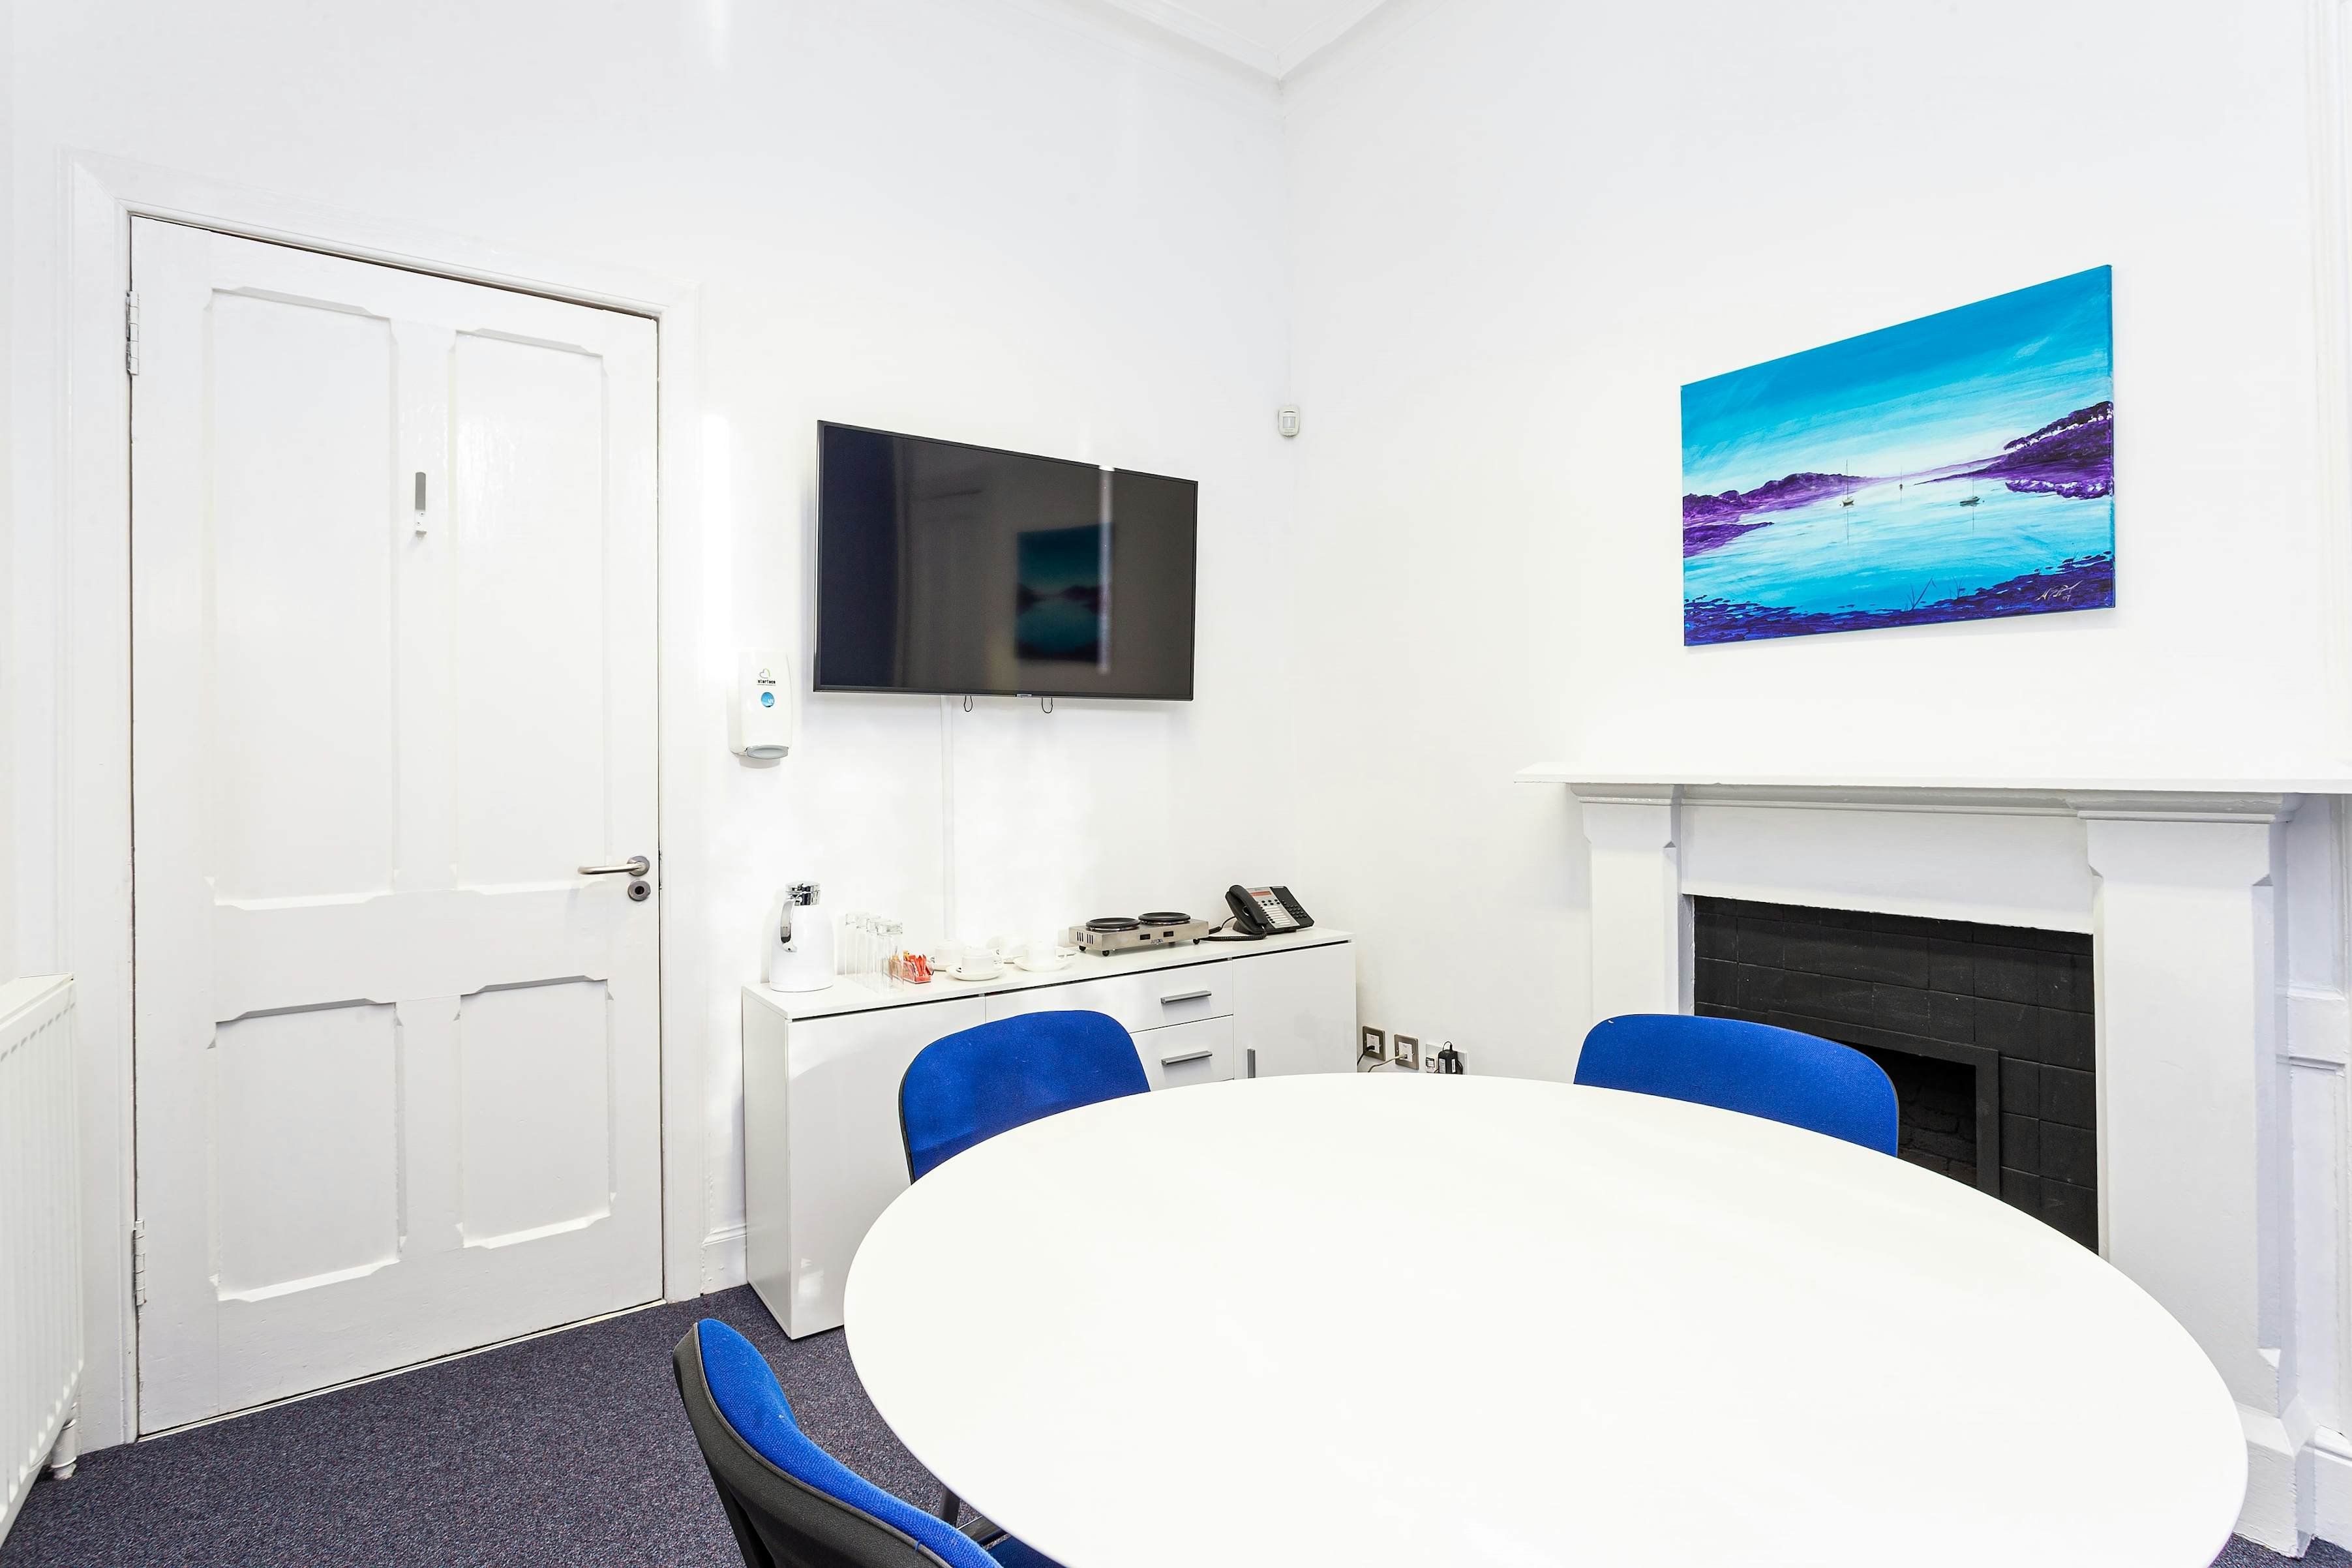 Meeting Rooms at Capital Business ...